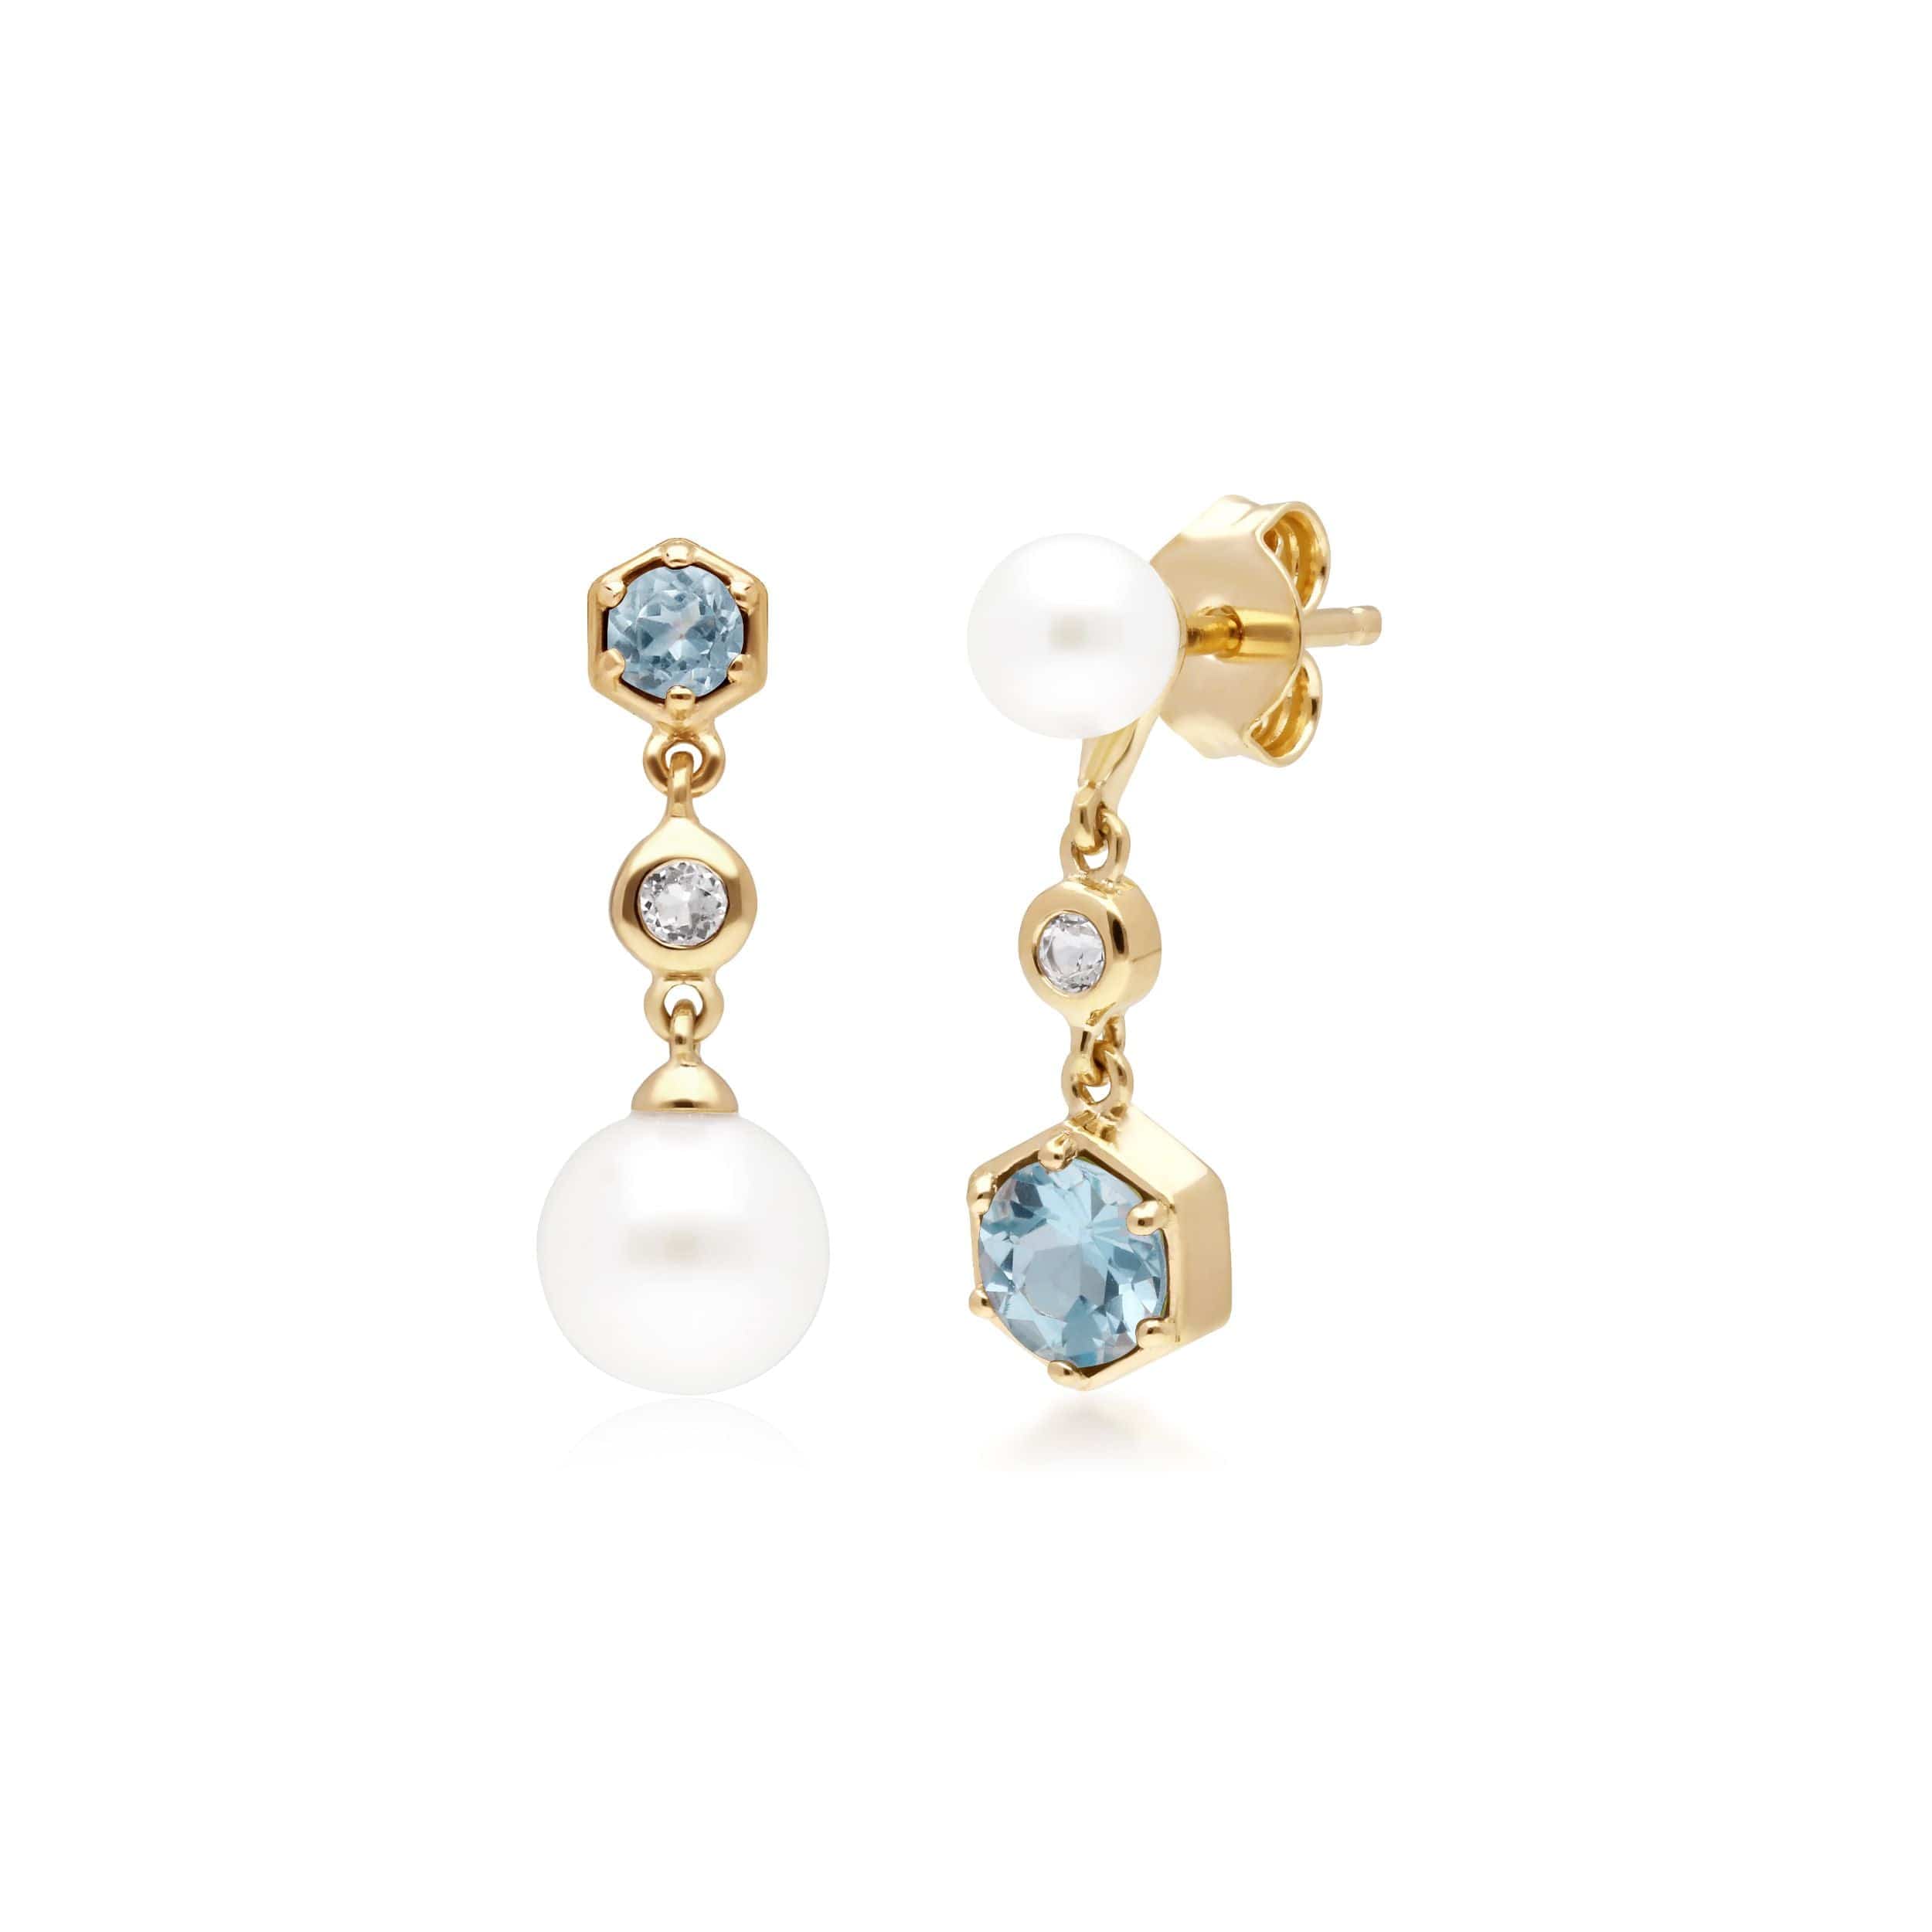 Modern Pearl, White & Blue Topaz Mismatched Drop Earrings in Gold Plated Silver - Gemondo